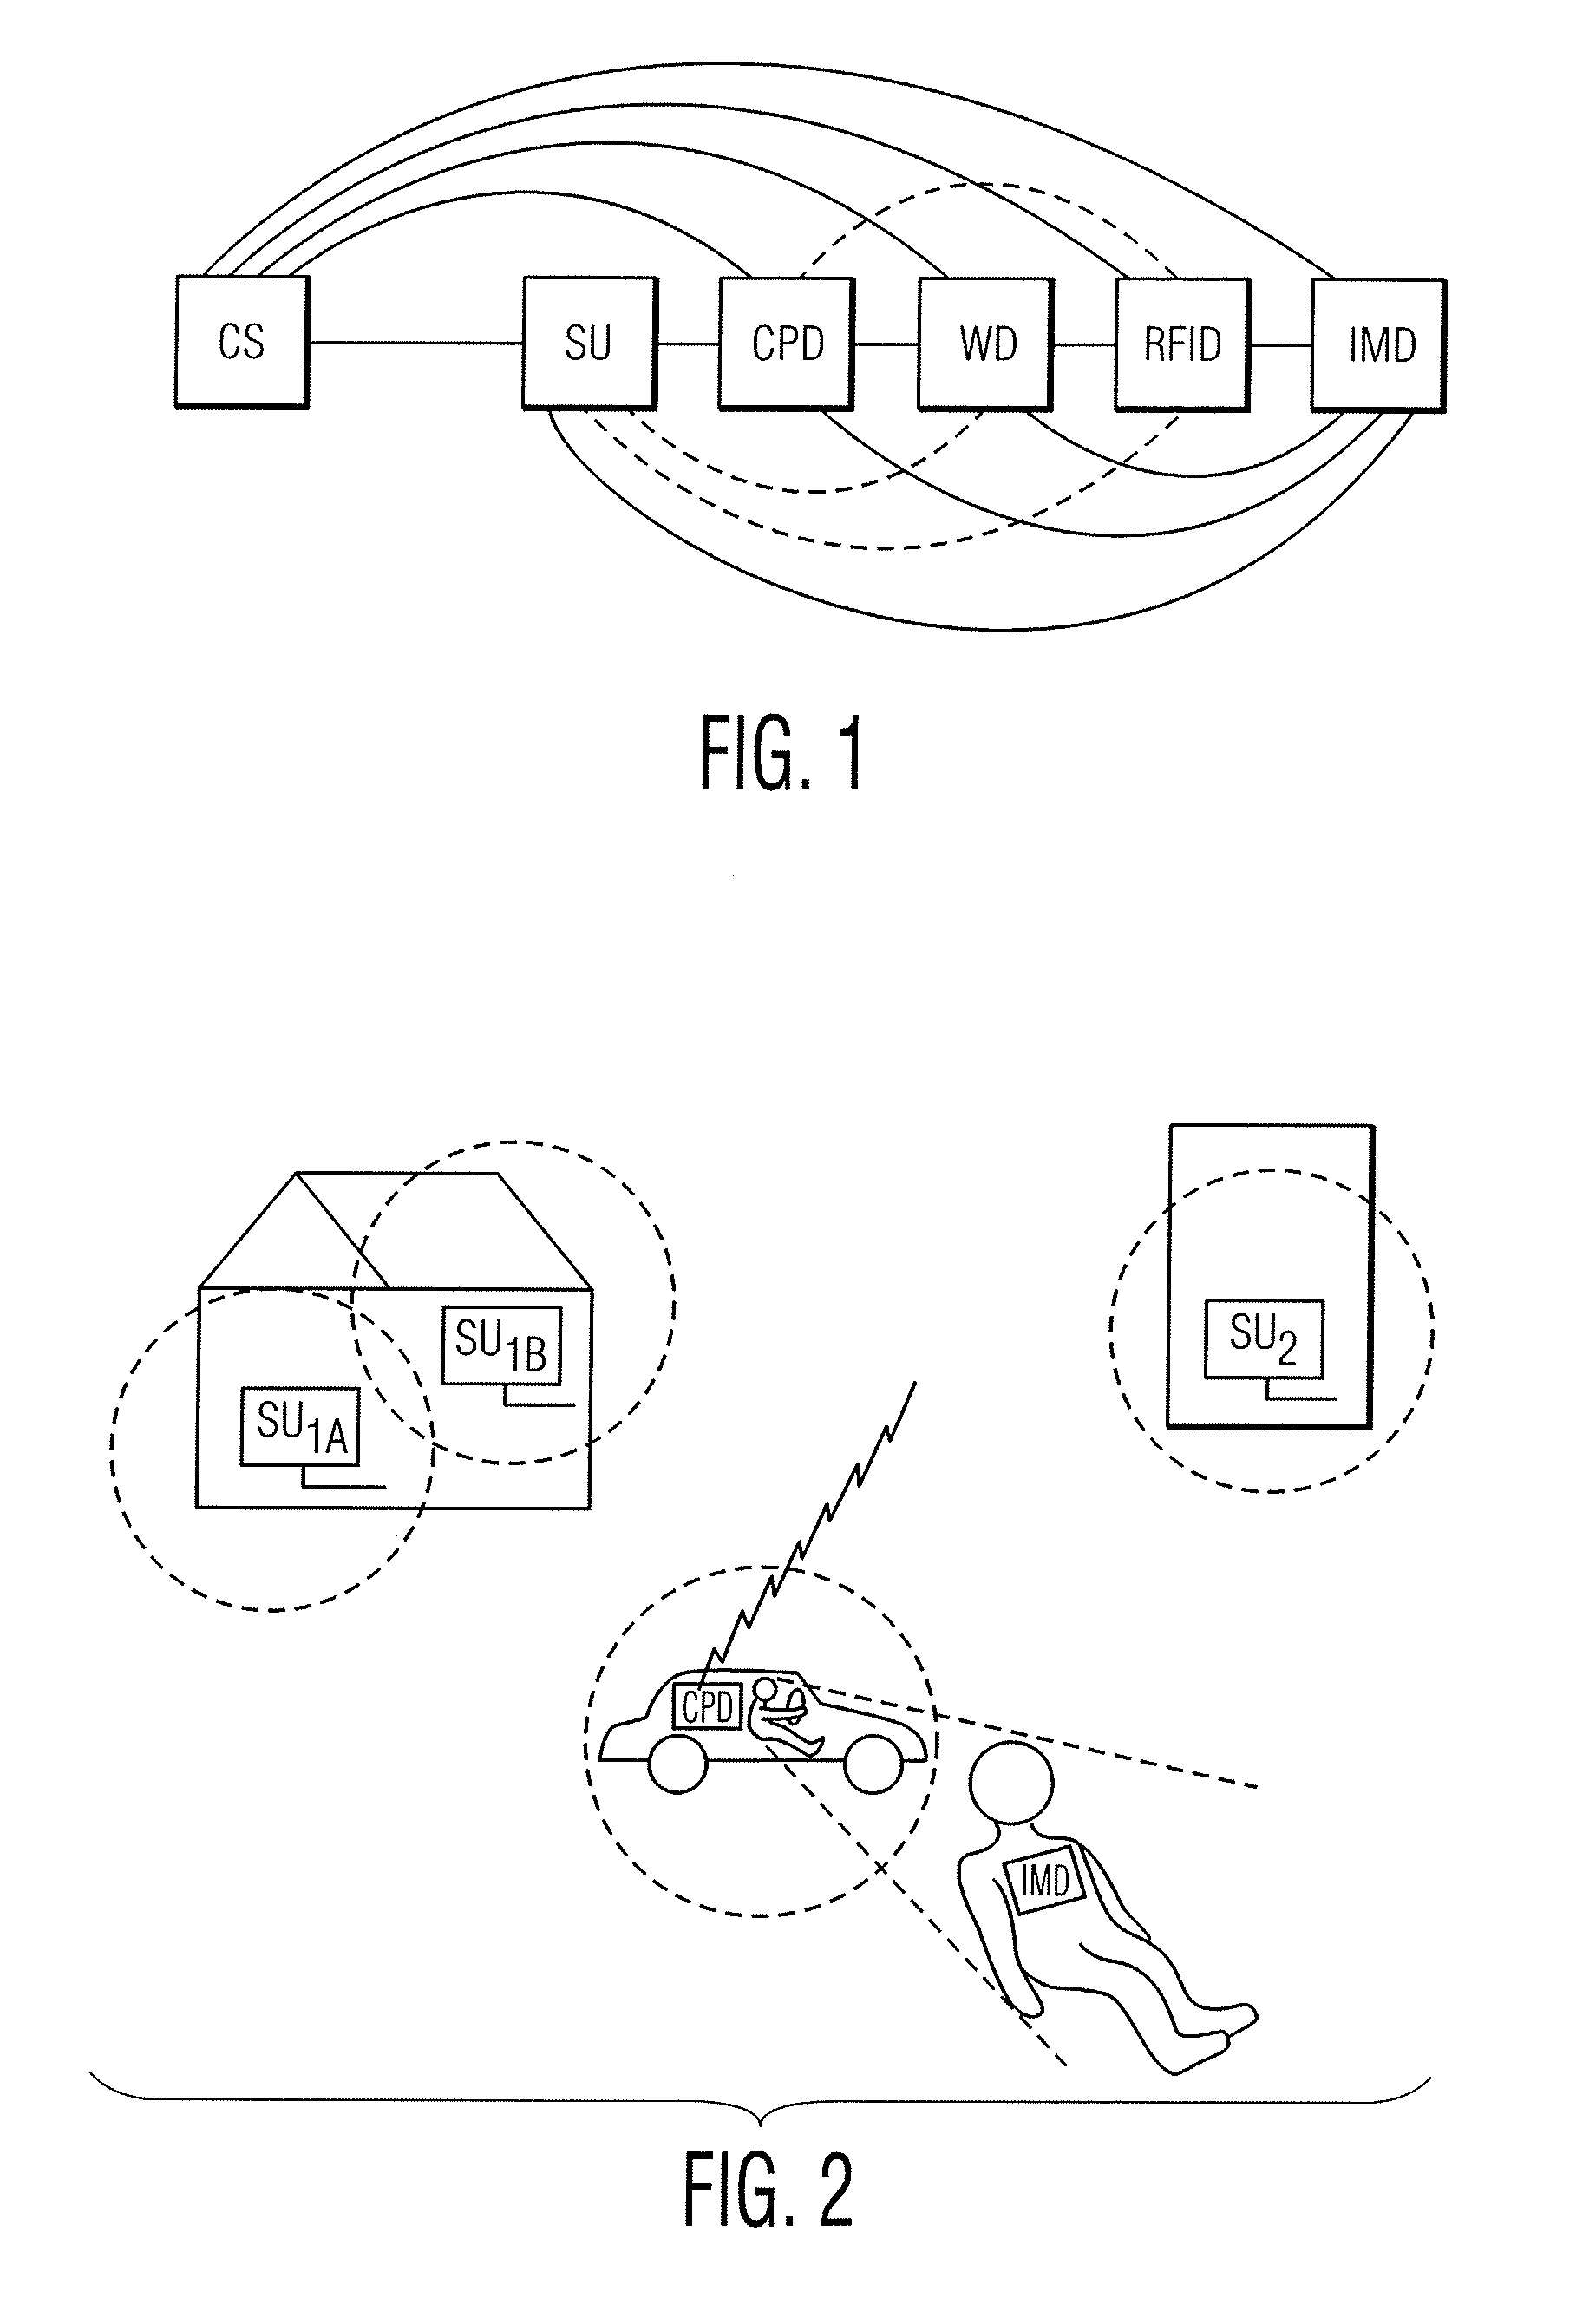 Method and apparatus for controlling an implantable medical device